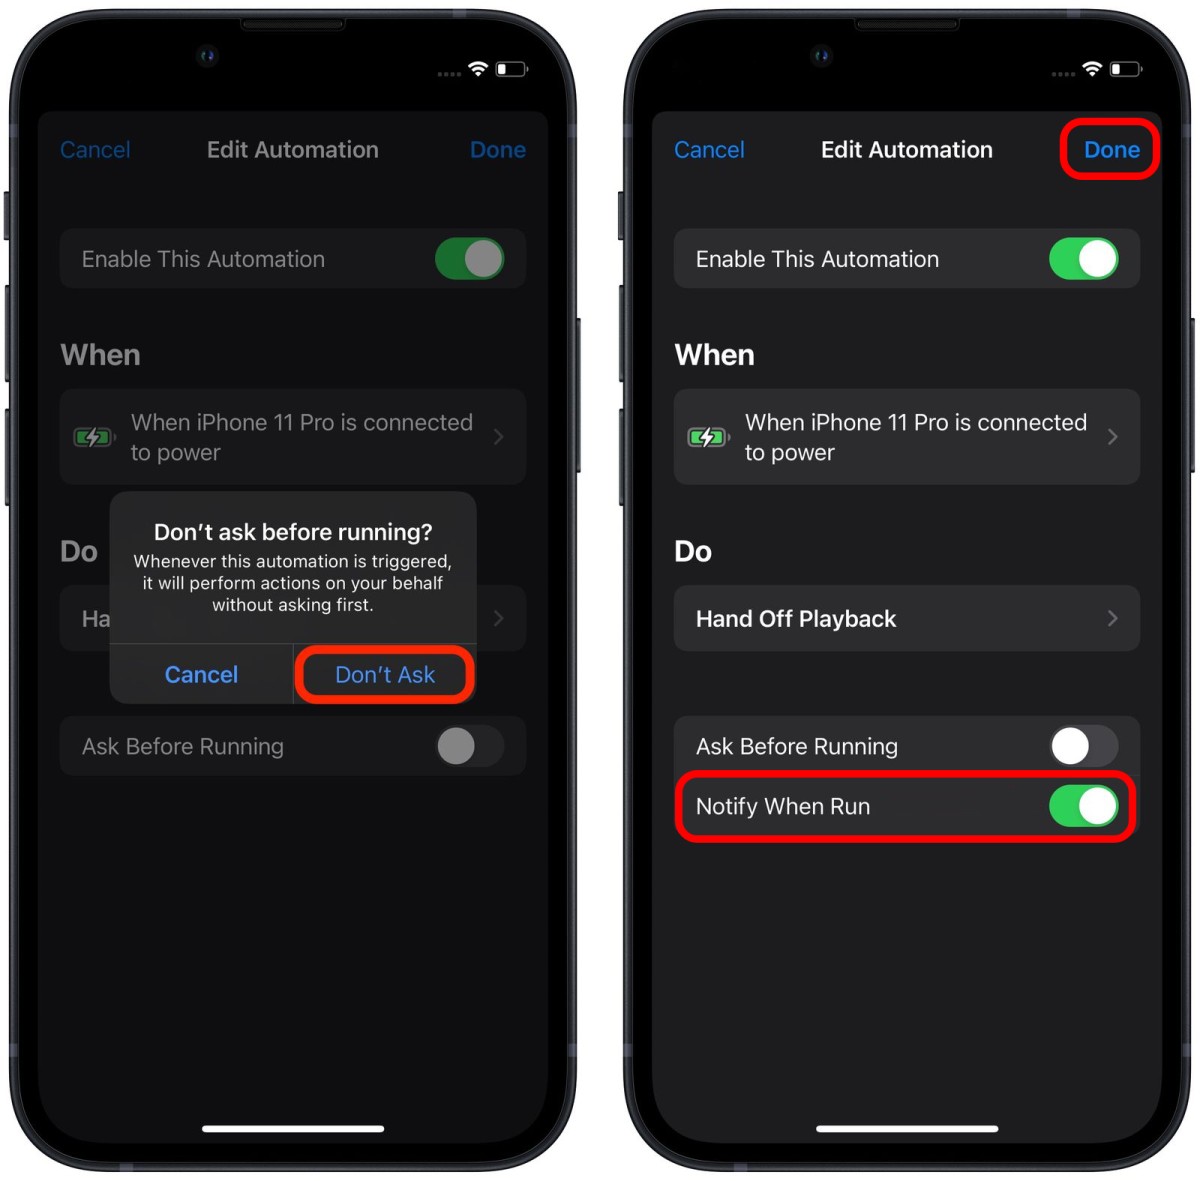 How To Turn Off Automation On IPhone